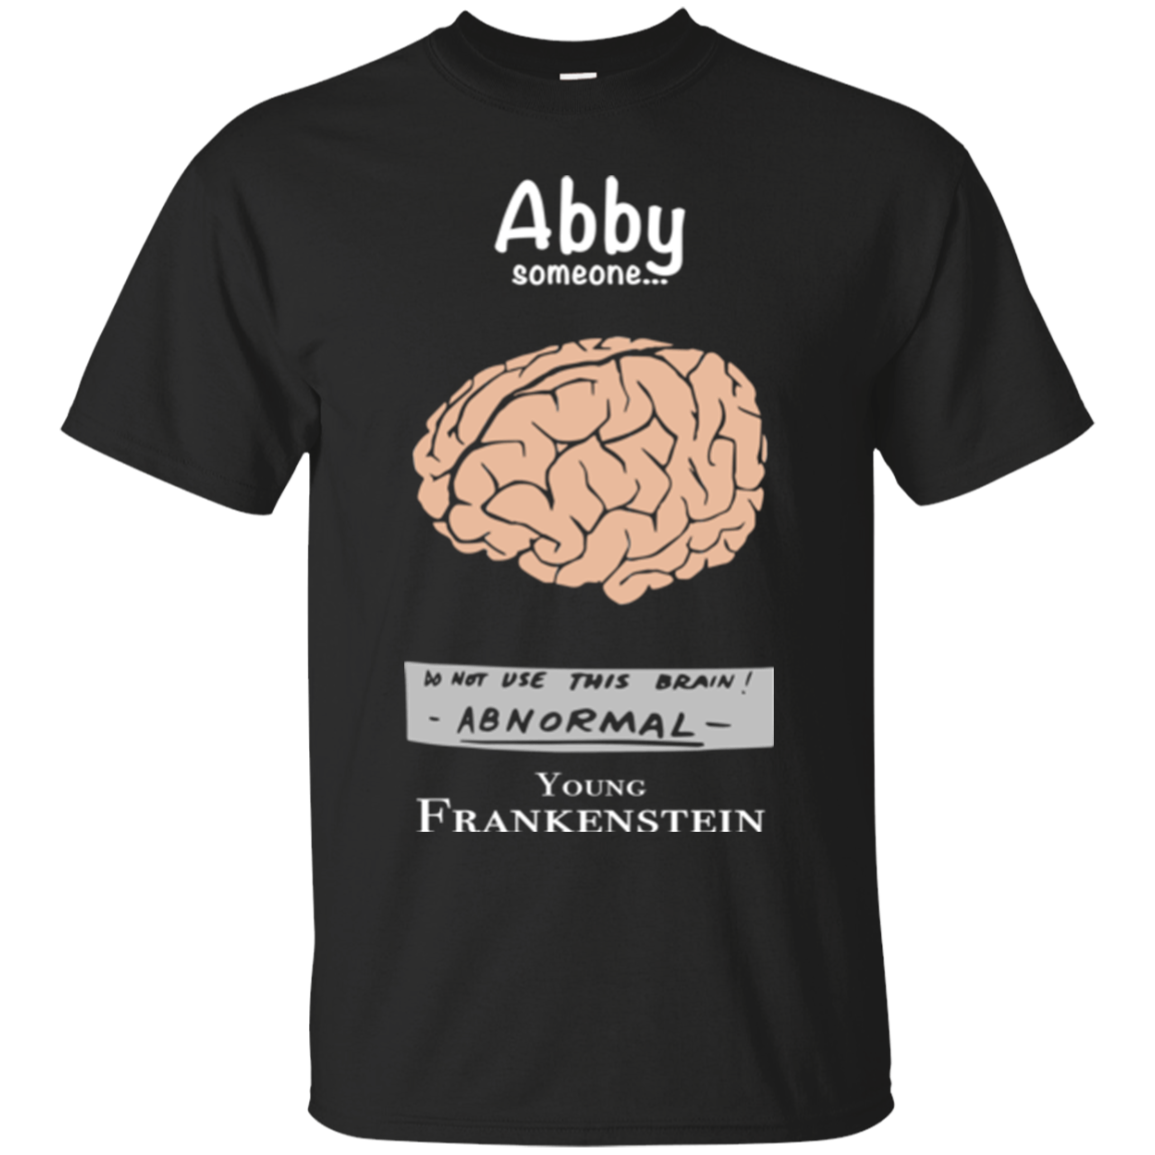 Abby Someone Do Not Use This Brain Abnormal Young Frankenstein Shirts ...